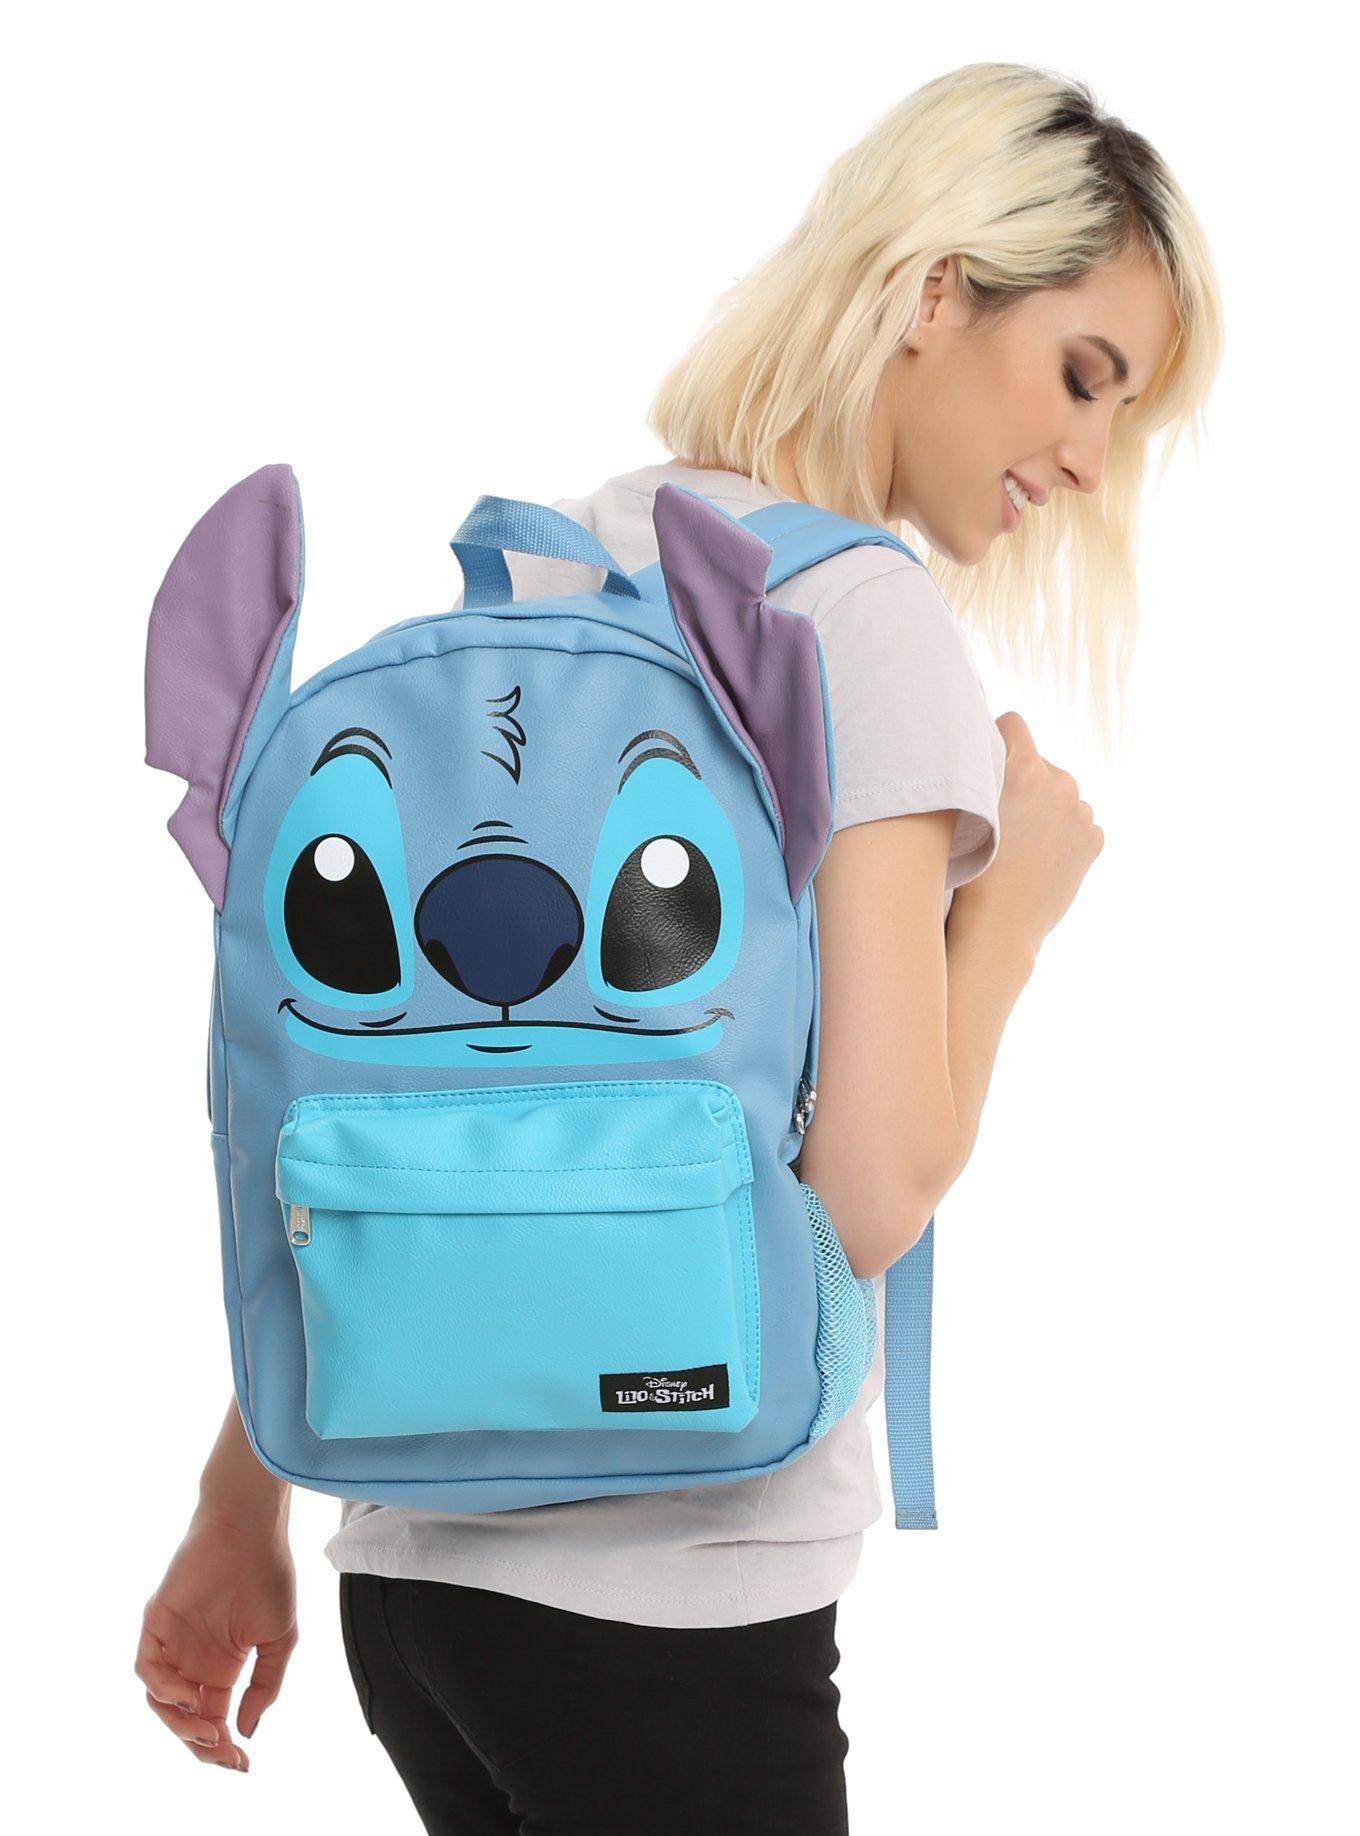 Disney Lilo & Stitch Character Backpack